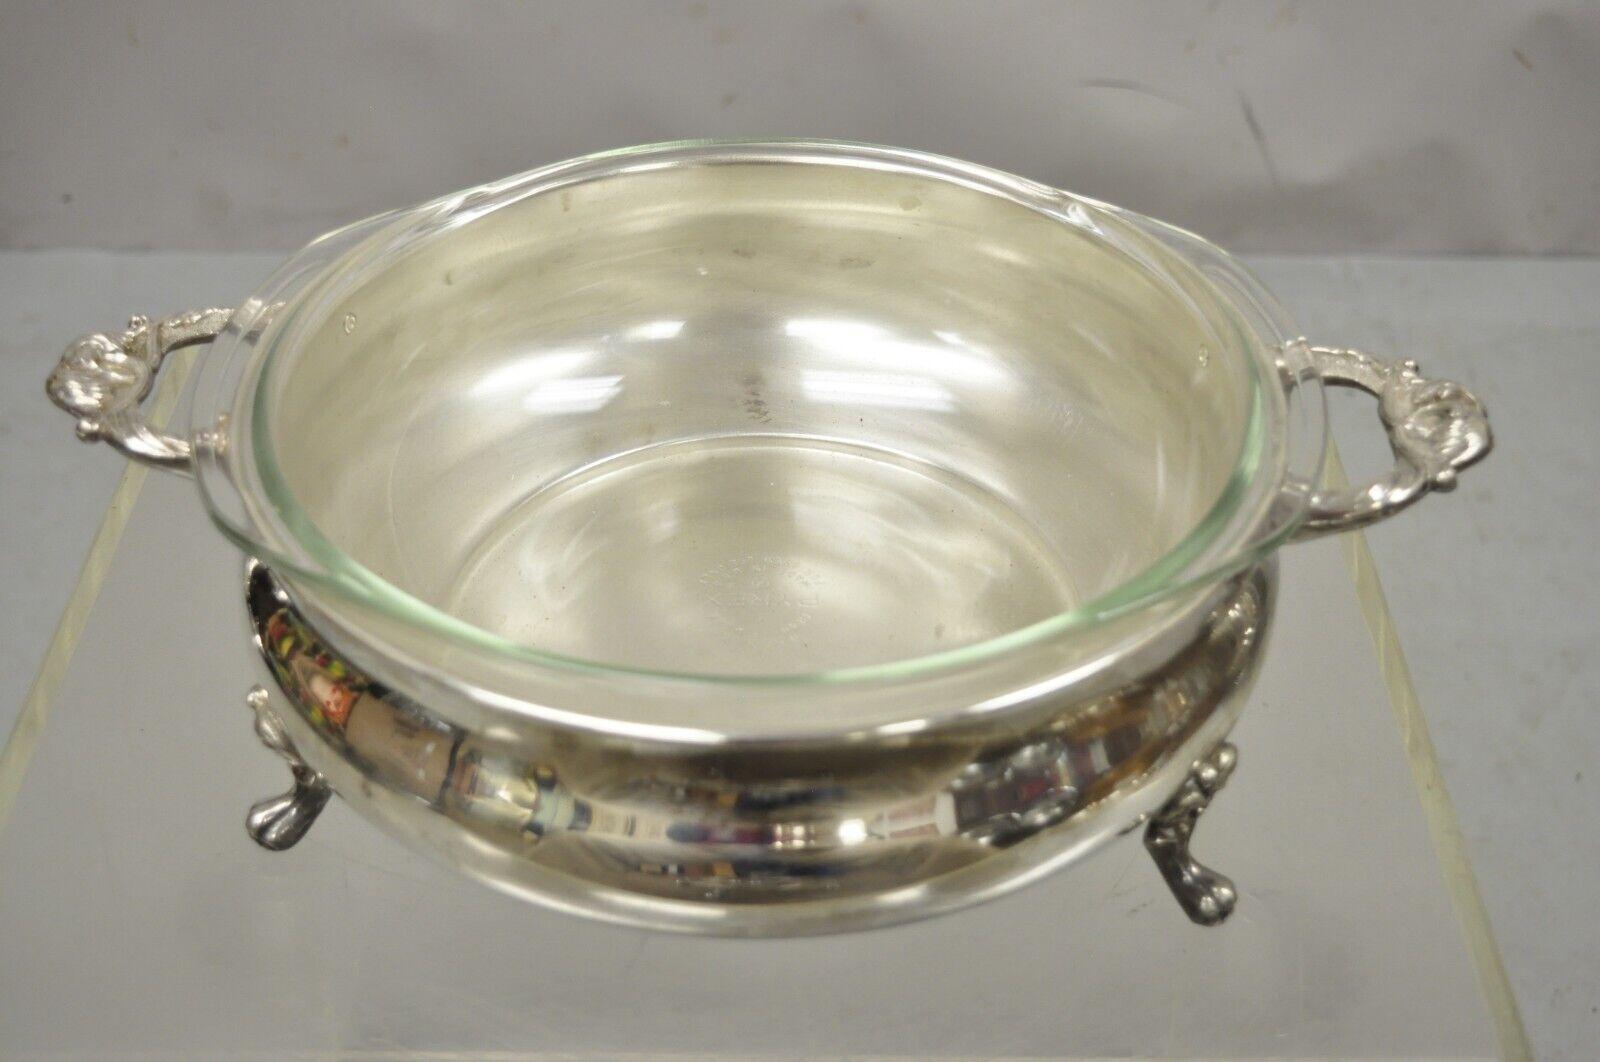 20th Century Silver Mfg Corp Silver Plate Covered Platter Serving Tray Dish Bowl on Feet For Sale